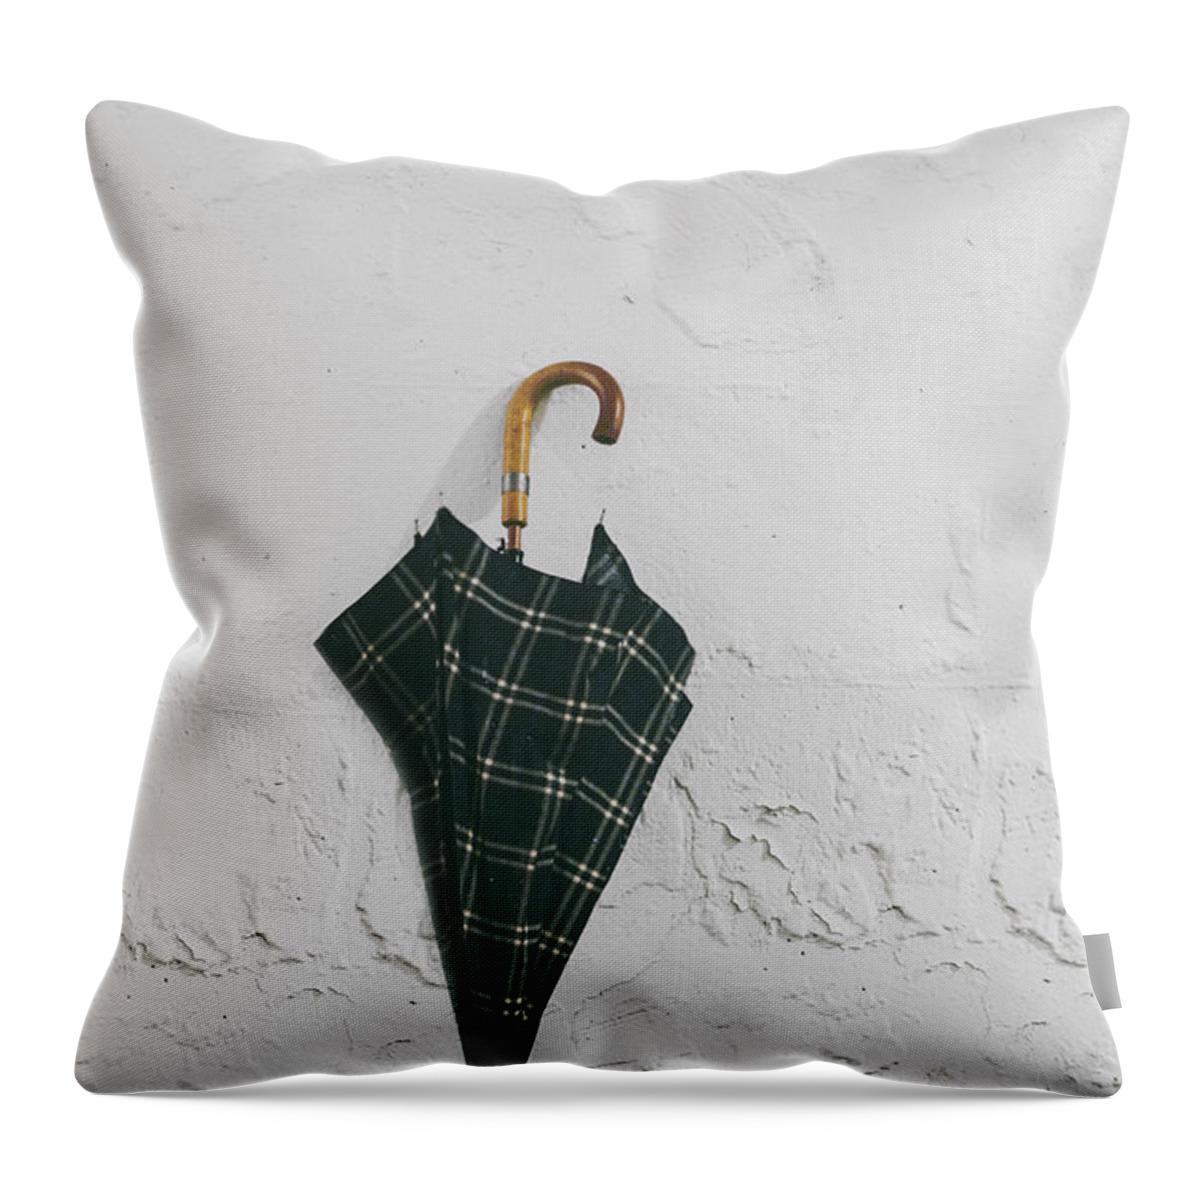 Umbrella Throw Pillow featuring the photograph Plaid by Margie Hurwich